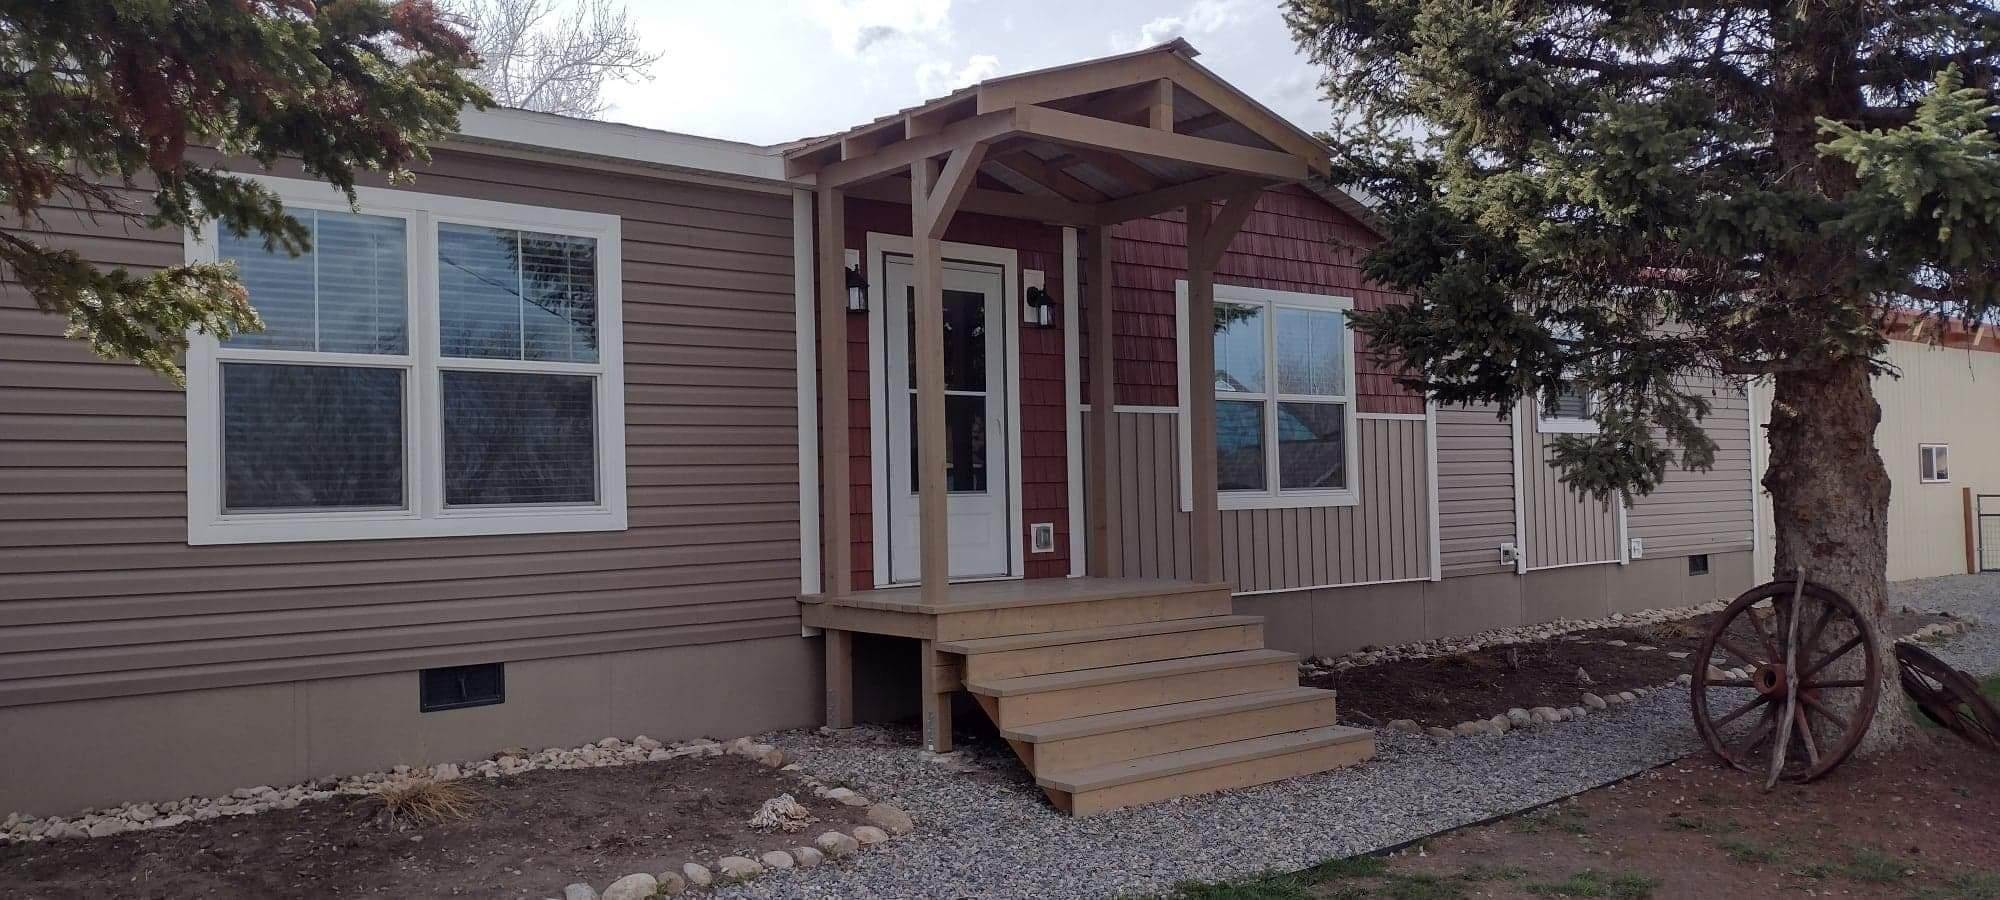 Single Family Homes for Sale at 122 Madison Street, Harrison, Montana 59735 United States